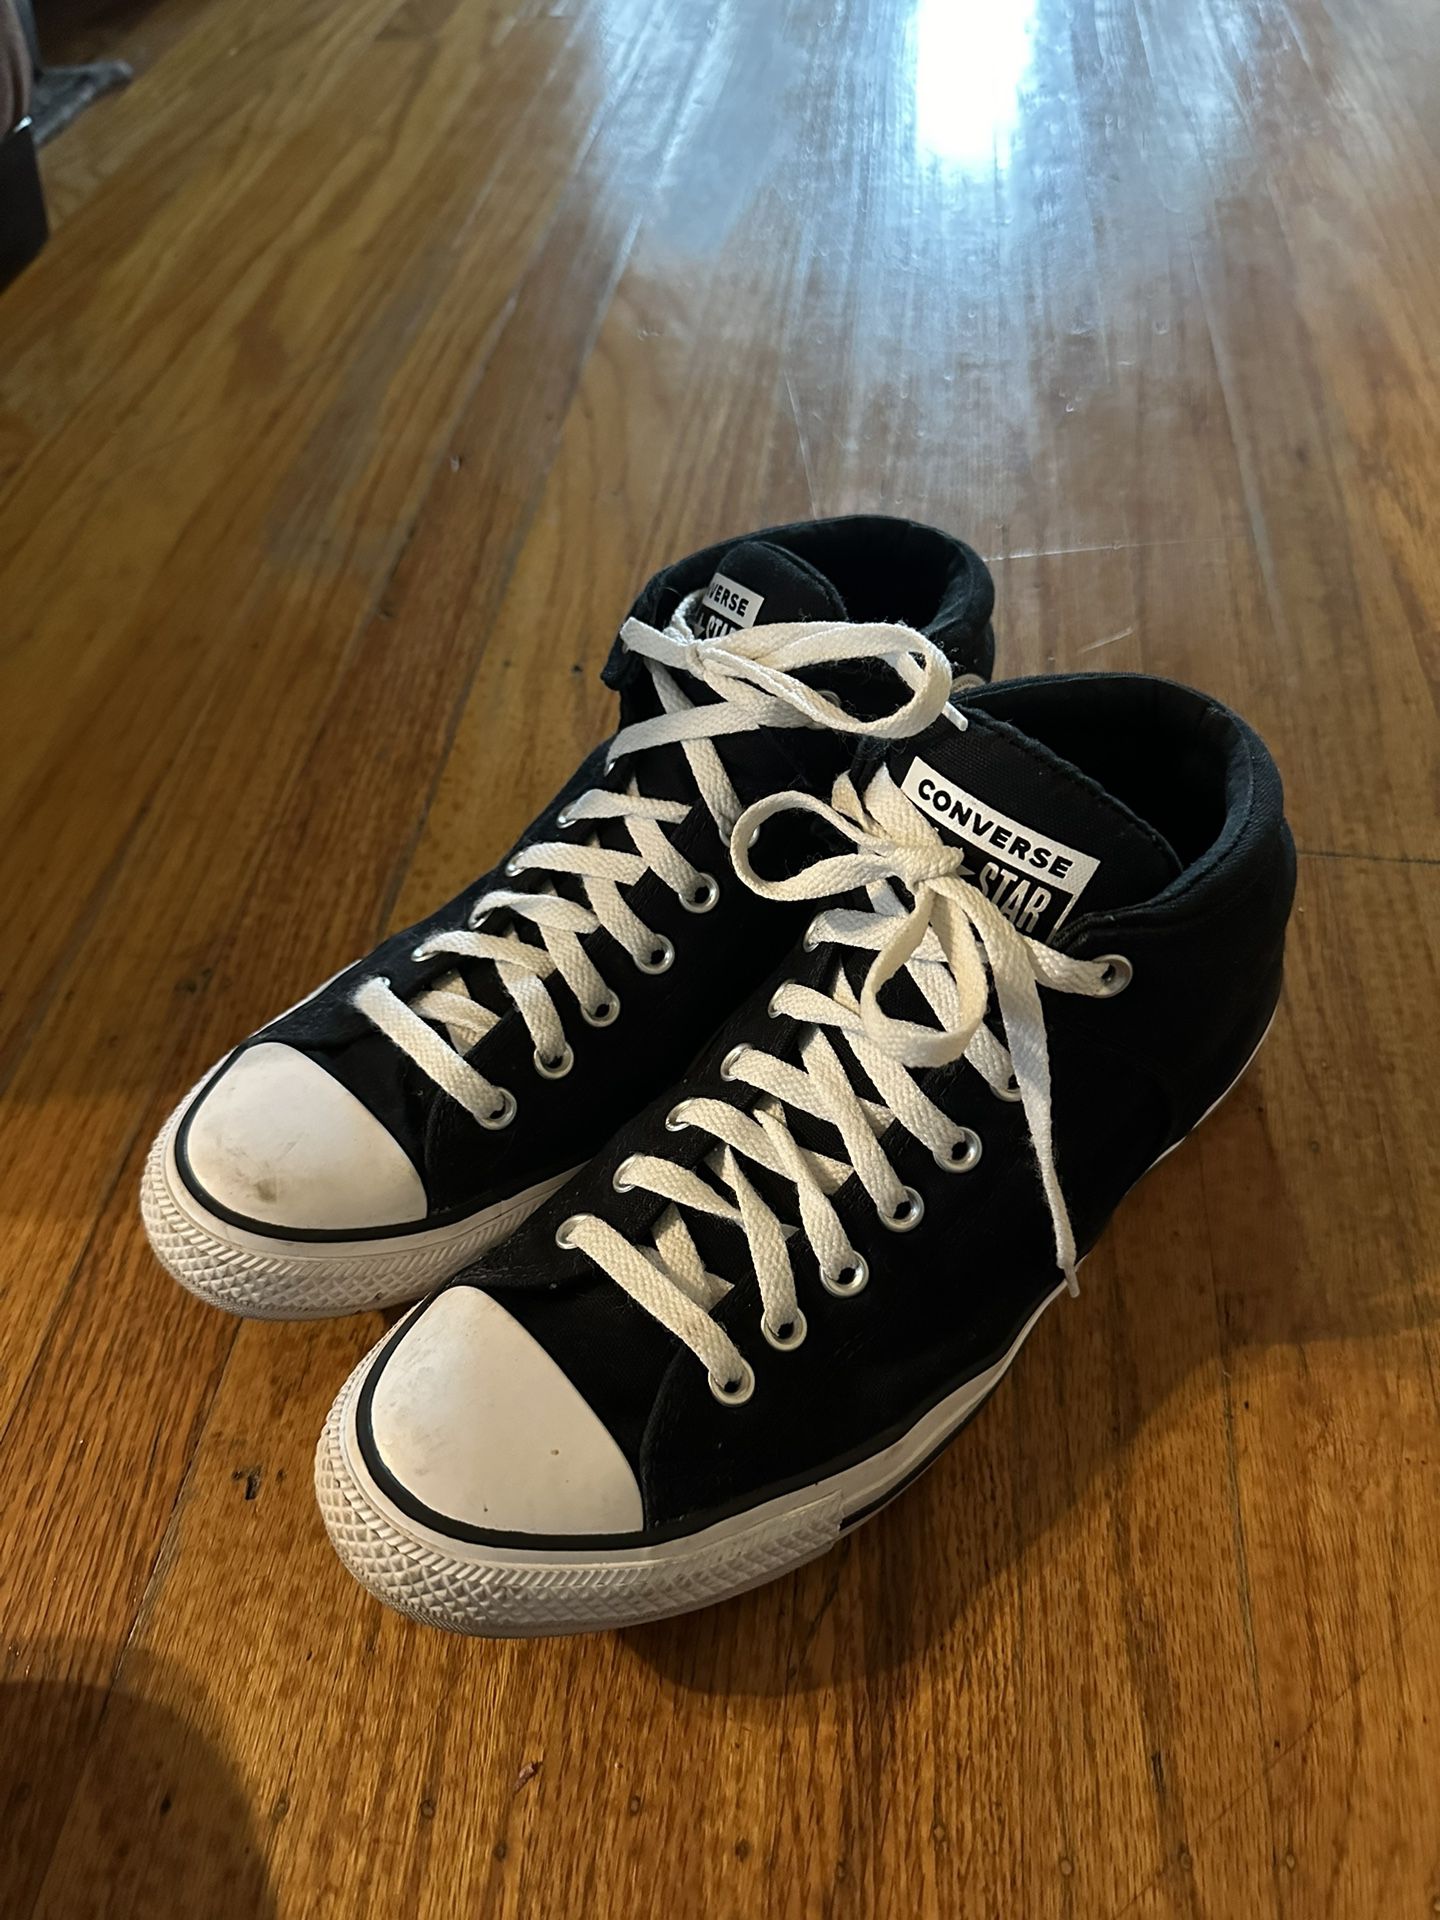 Converse Chuck Taylor High Street Mid Sneakers  